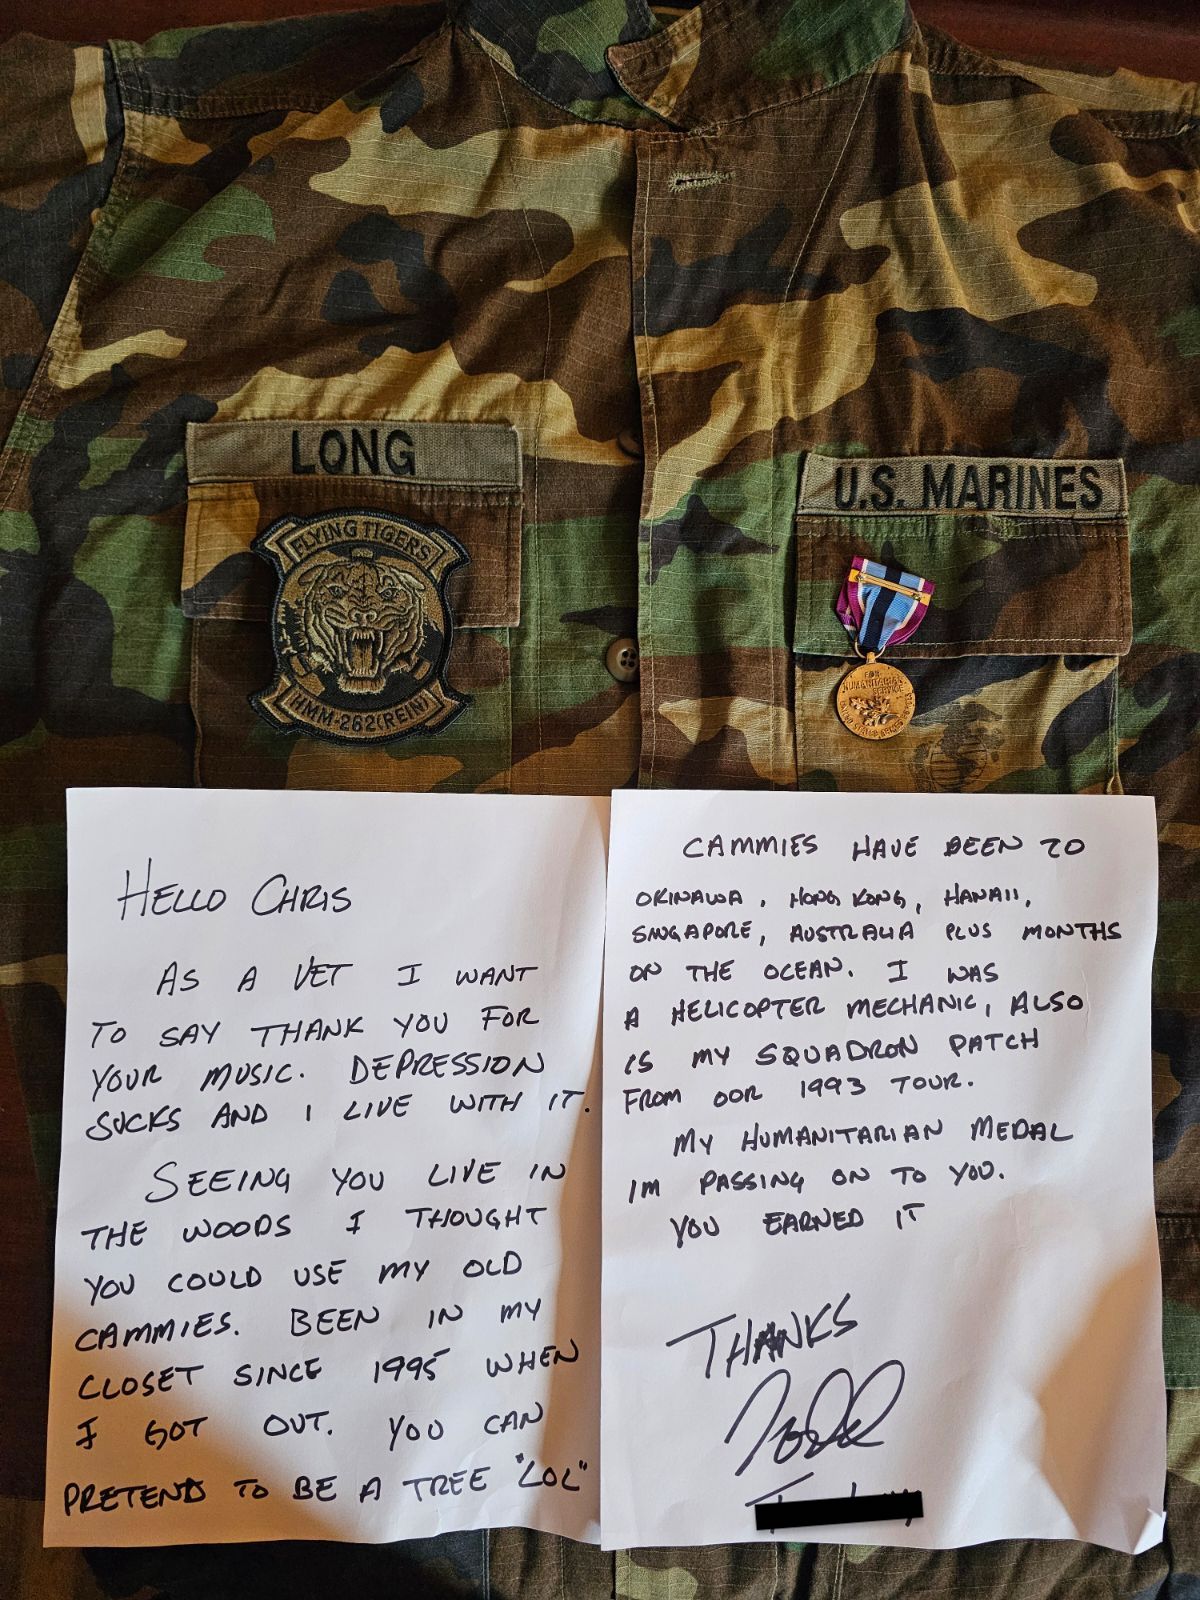 Oliver Anthony received this note and set of "cammies" from a veteran